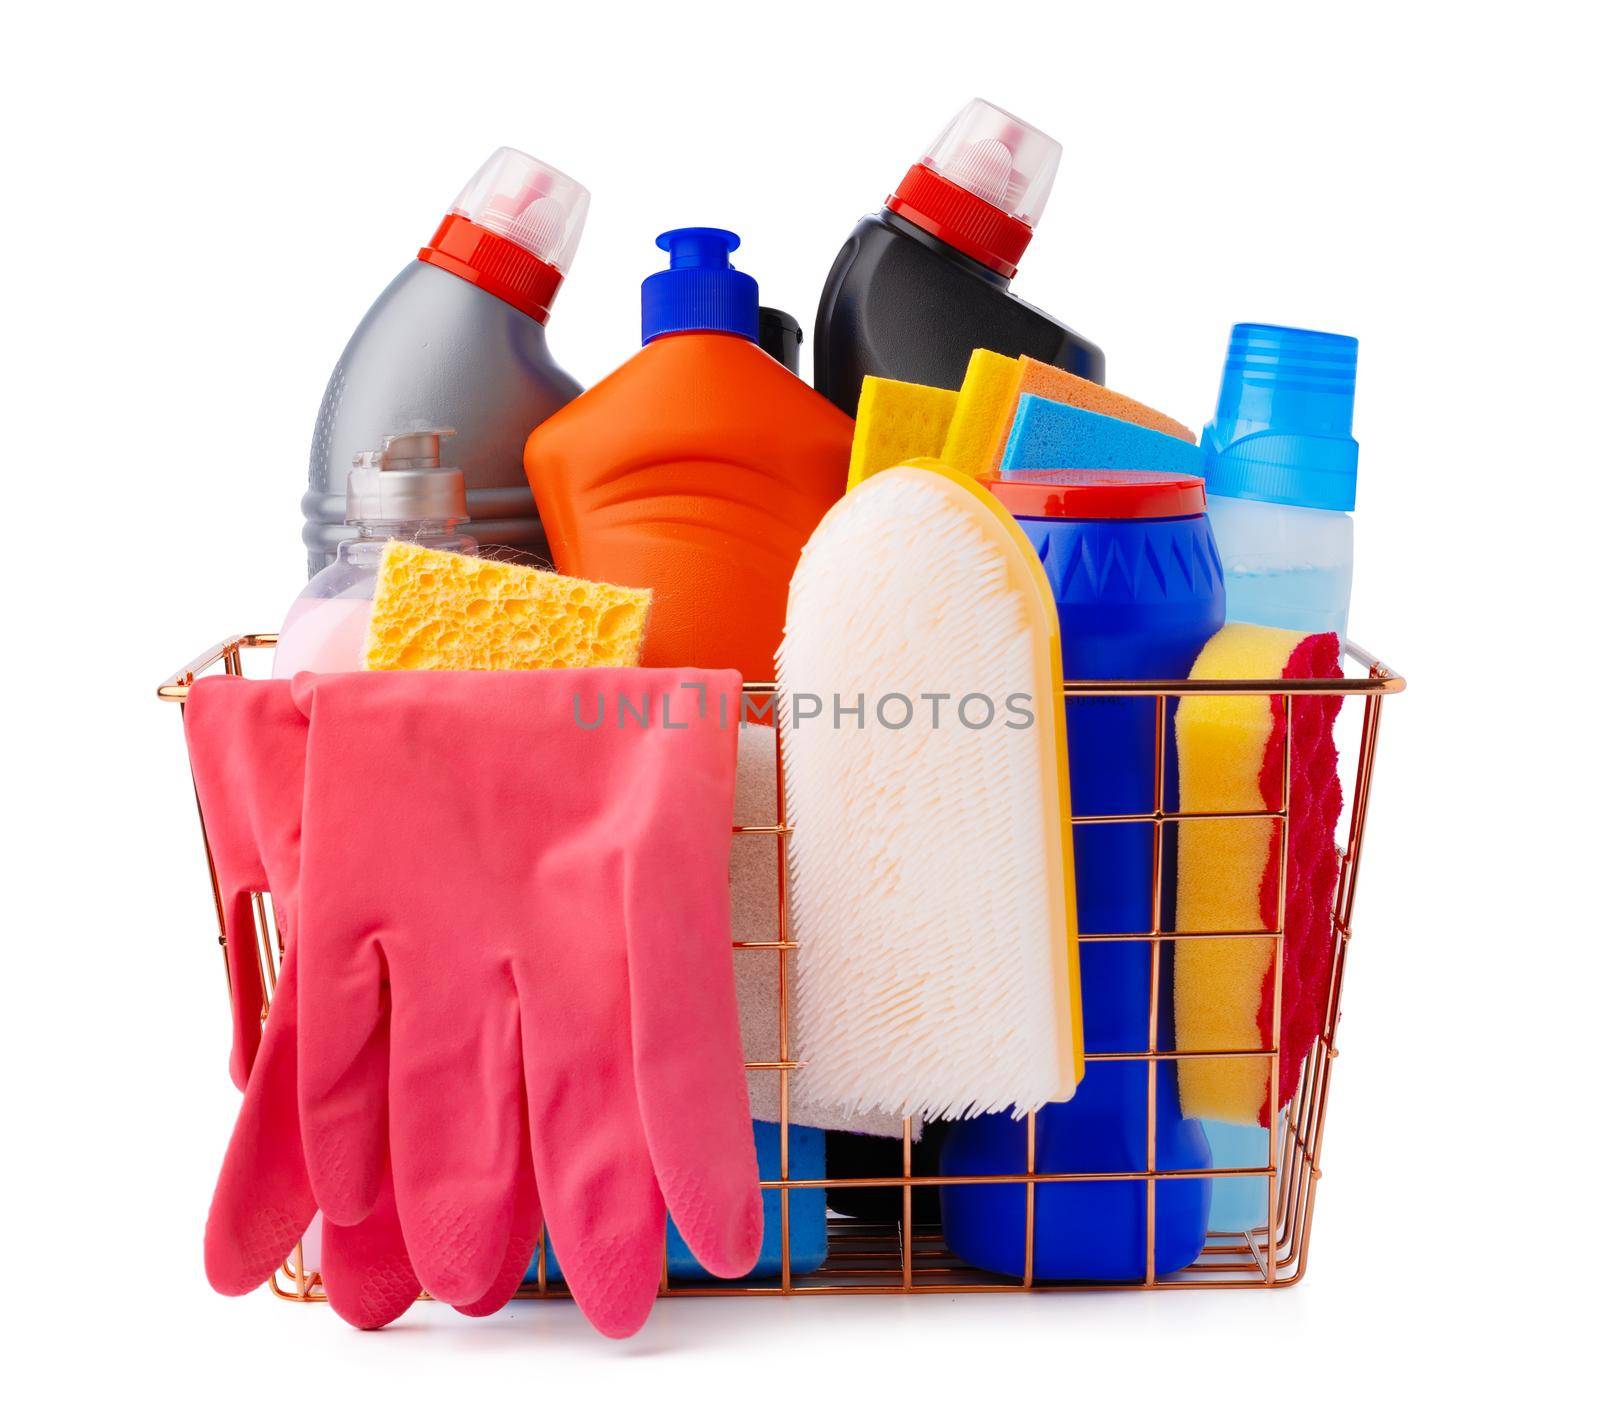 Cleaning items in basket isolated on white background by Fabrikasimf